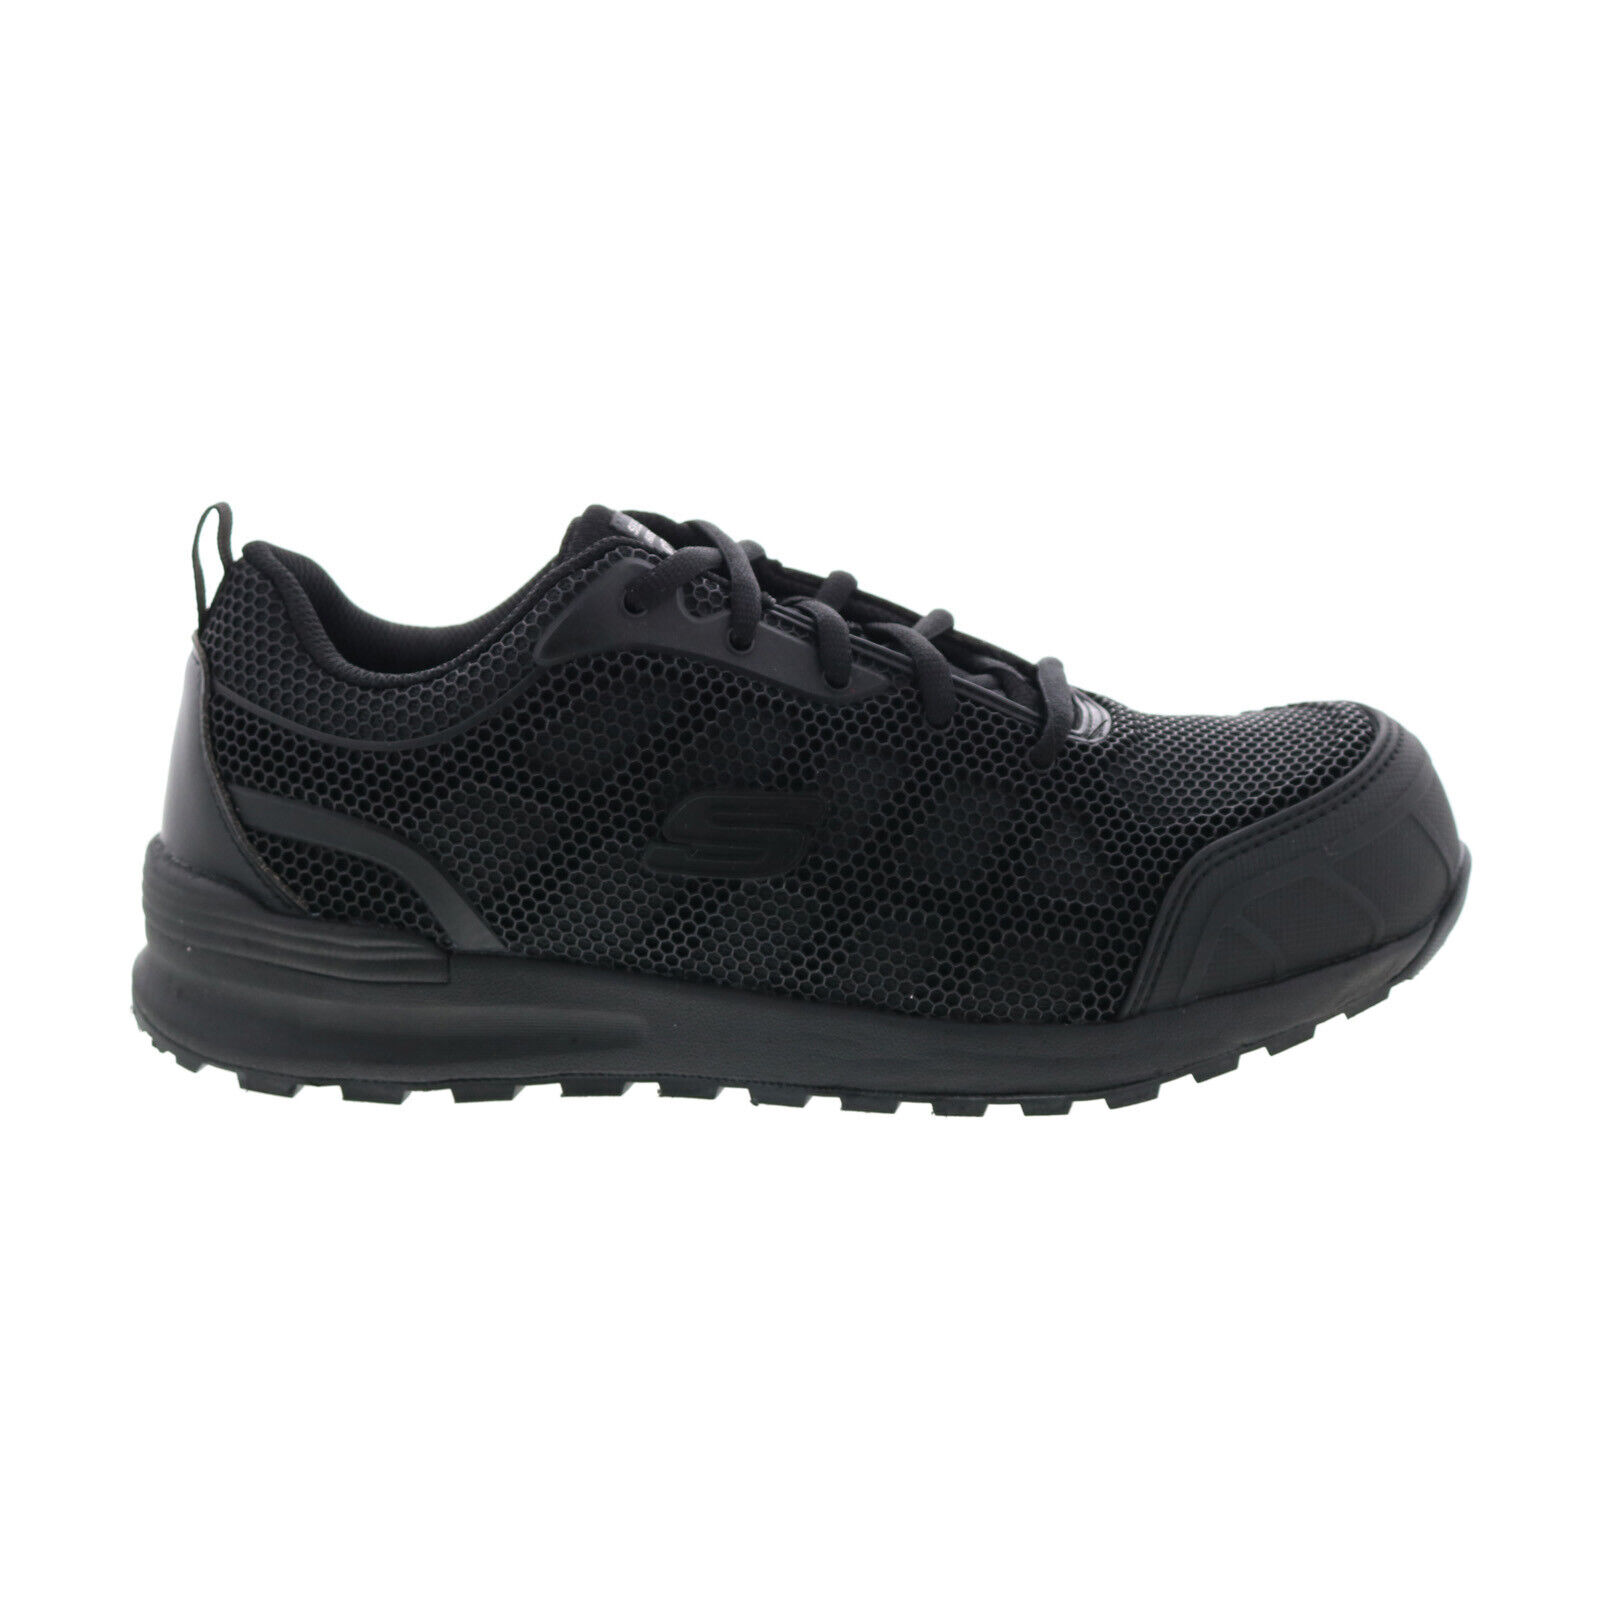 Skechers Bulklin Ayak 77289 Womens Black Canvas Lace Up Athletic Work Shoes